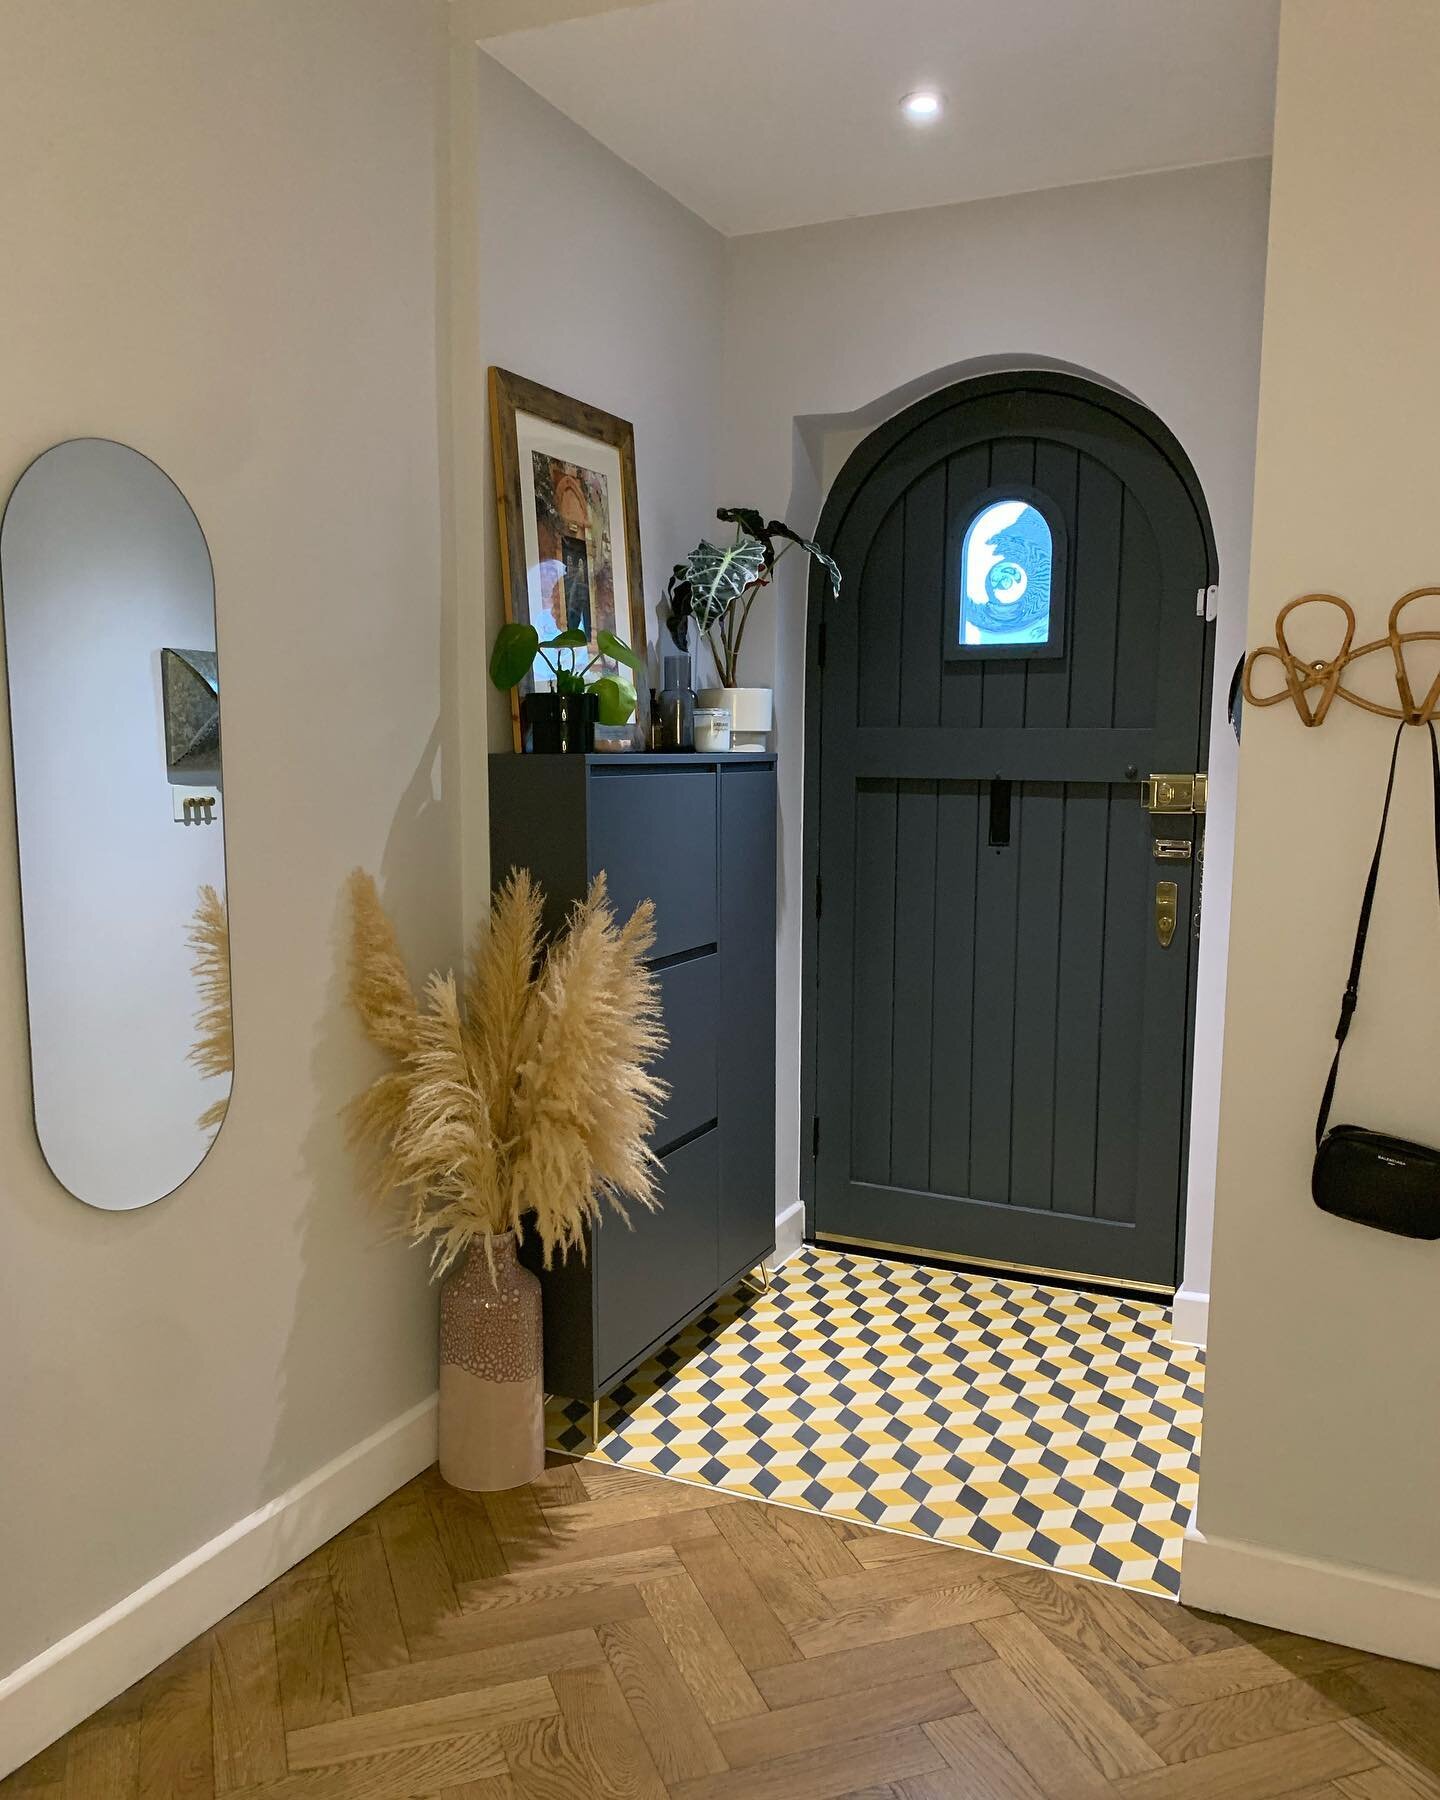 First Impressions
A little fact about this area; When we first renovated I decided to put a front door mat in our porch as its really useful but as Instagram influenced me I decided tiles would be better here 😆 
Although slightly less practical I am